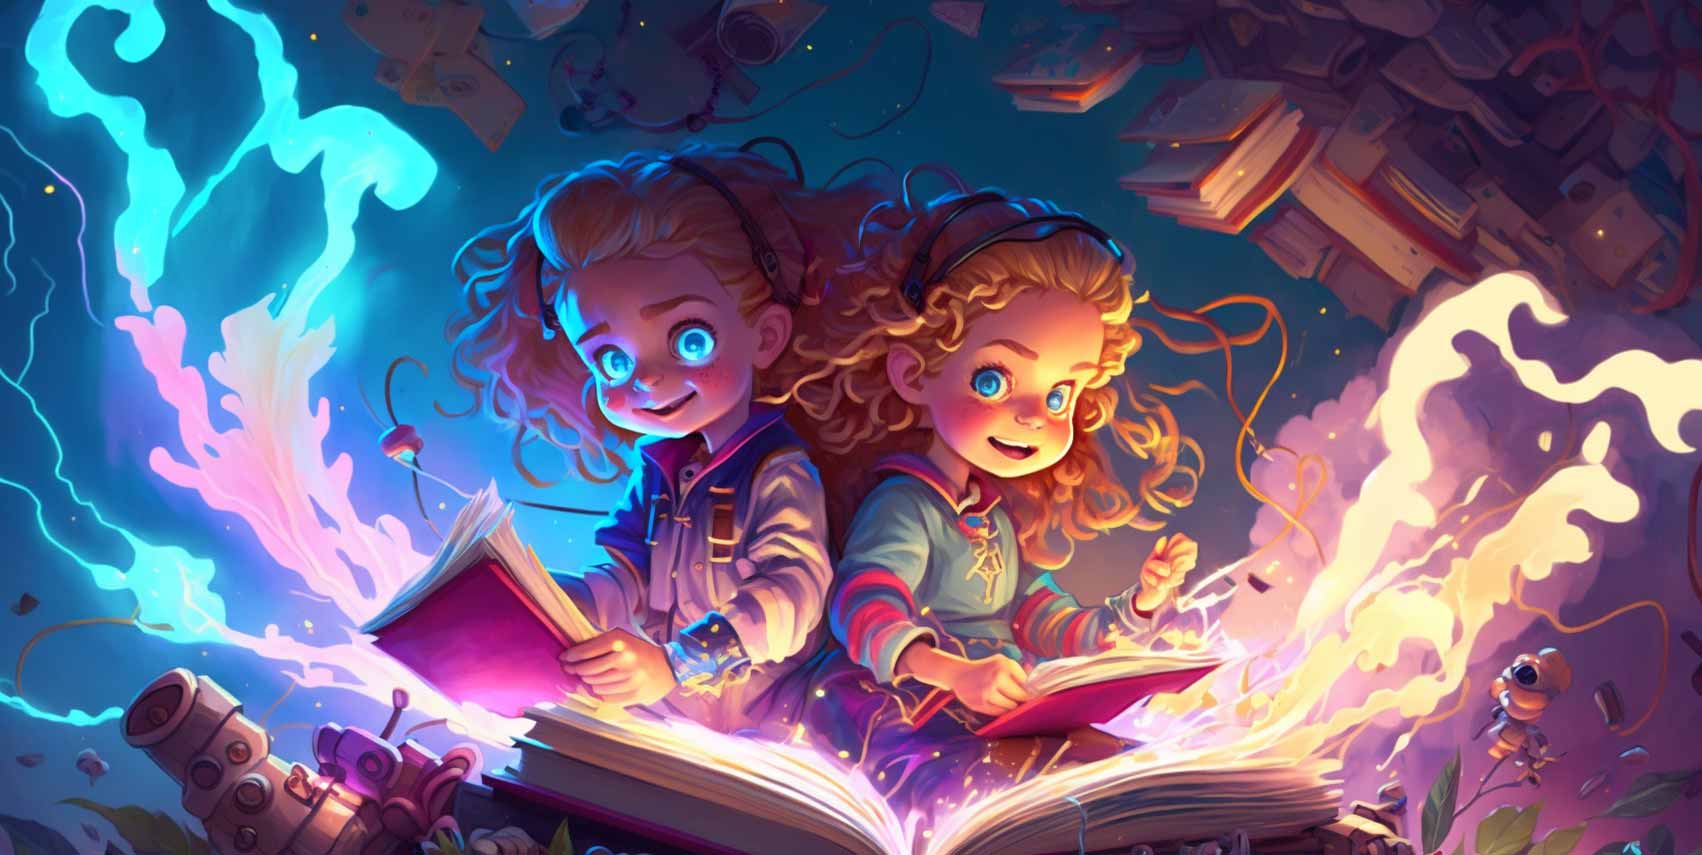 15 Art Books for Kids and Teens to Teach and Inspire!